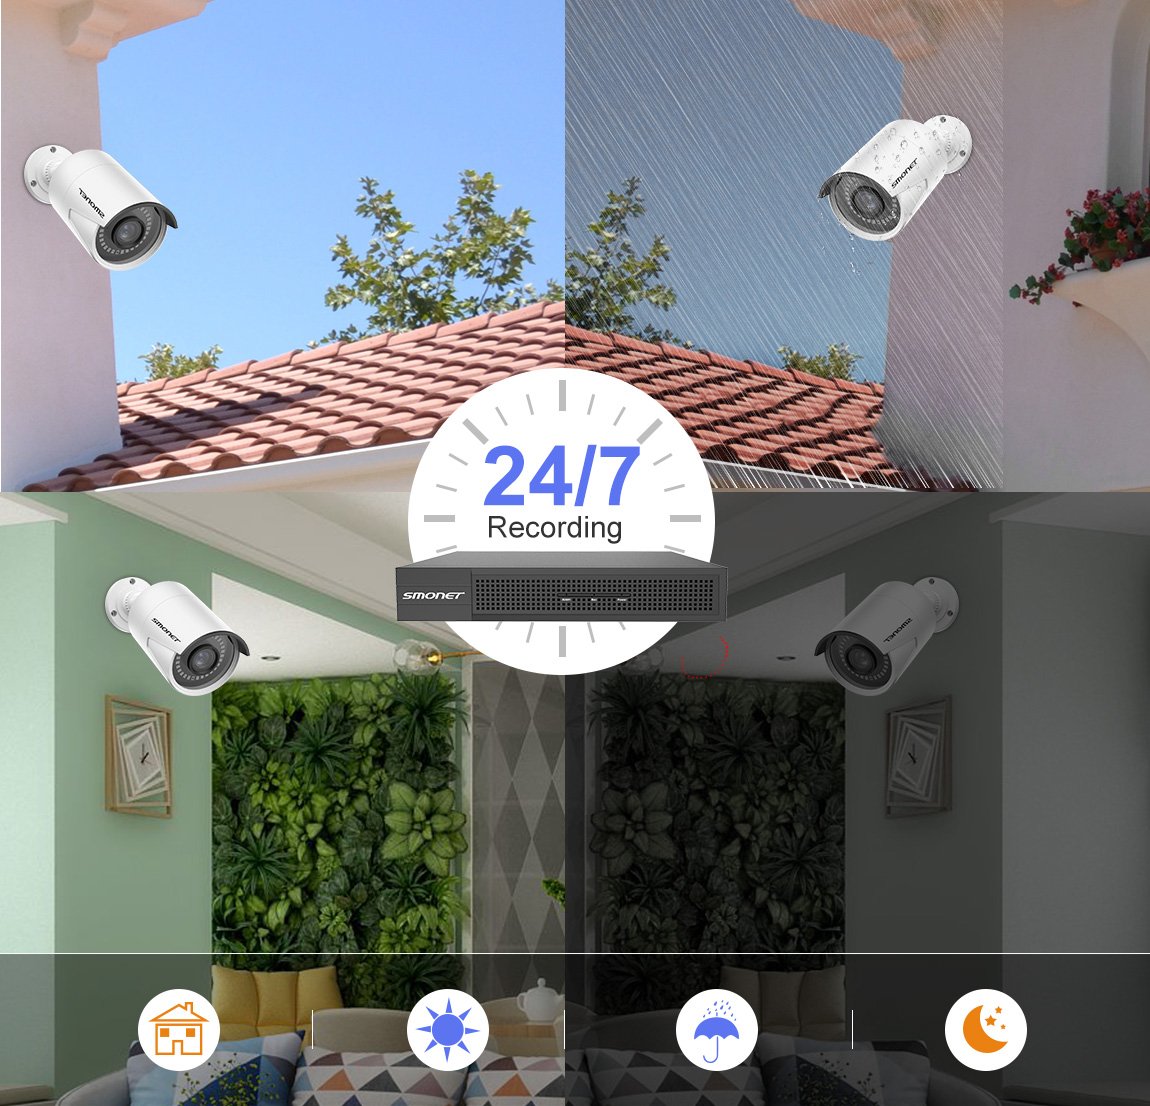 4 Benefits You Can Get from Smonet Security Camera System